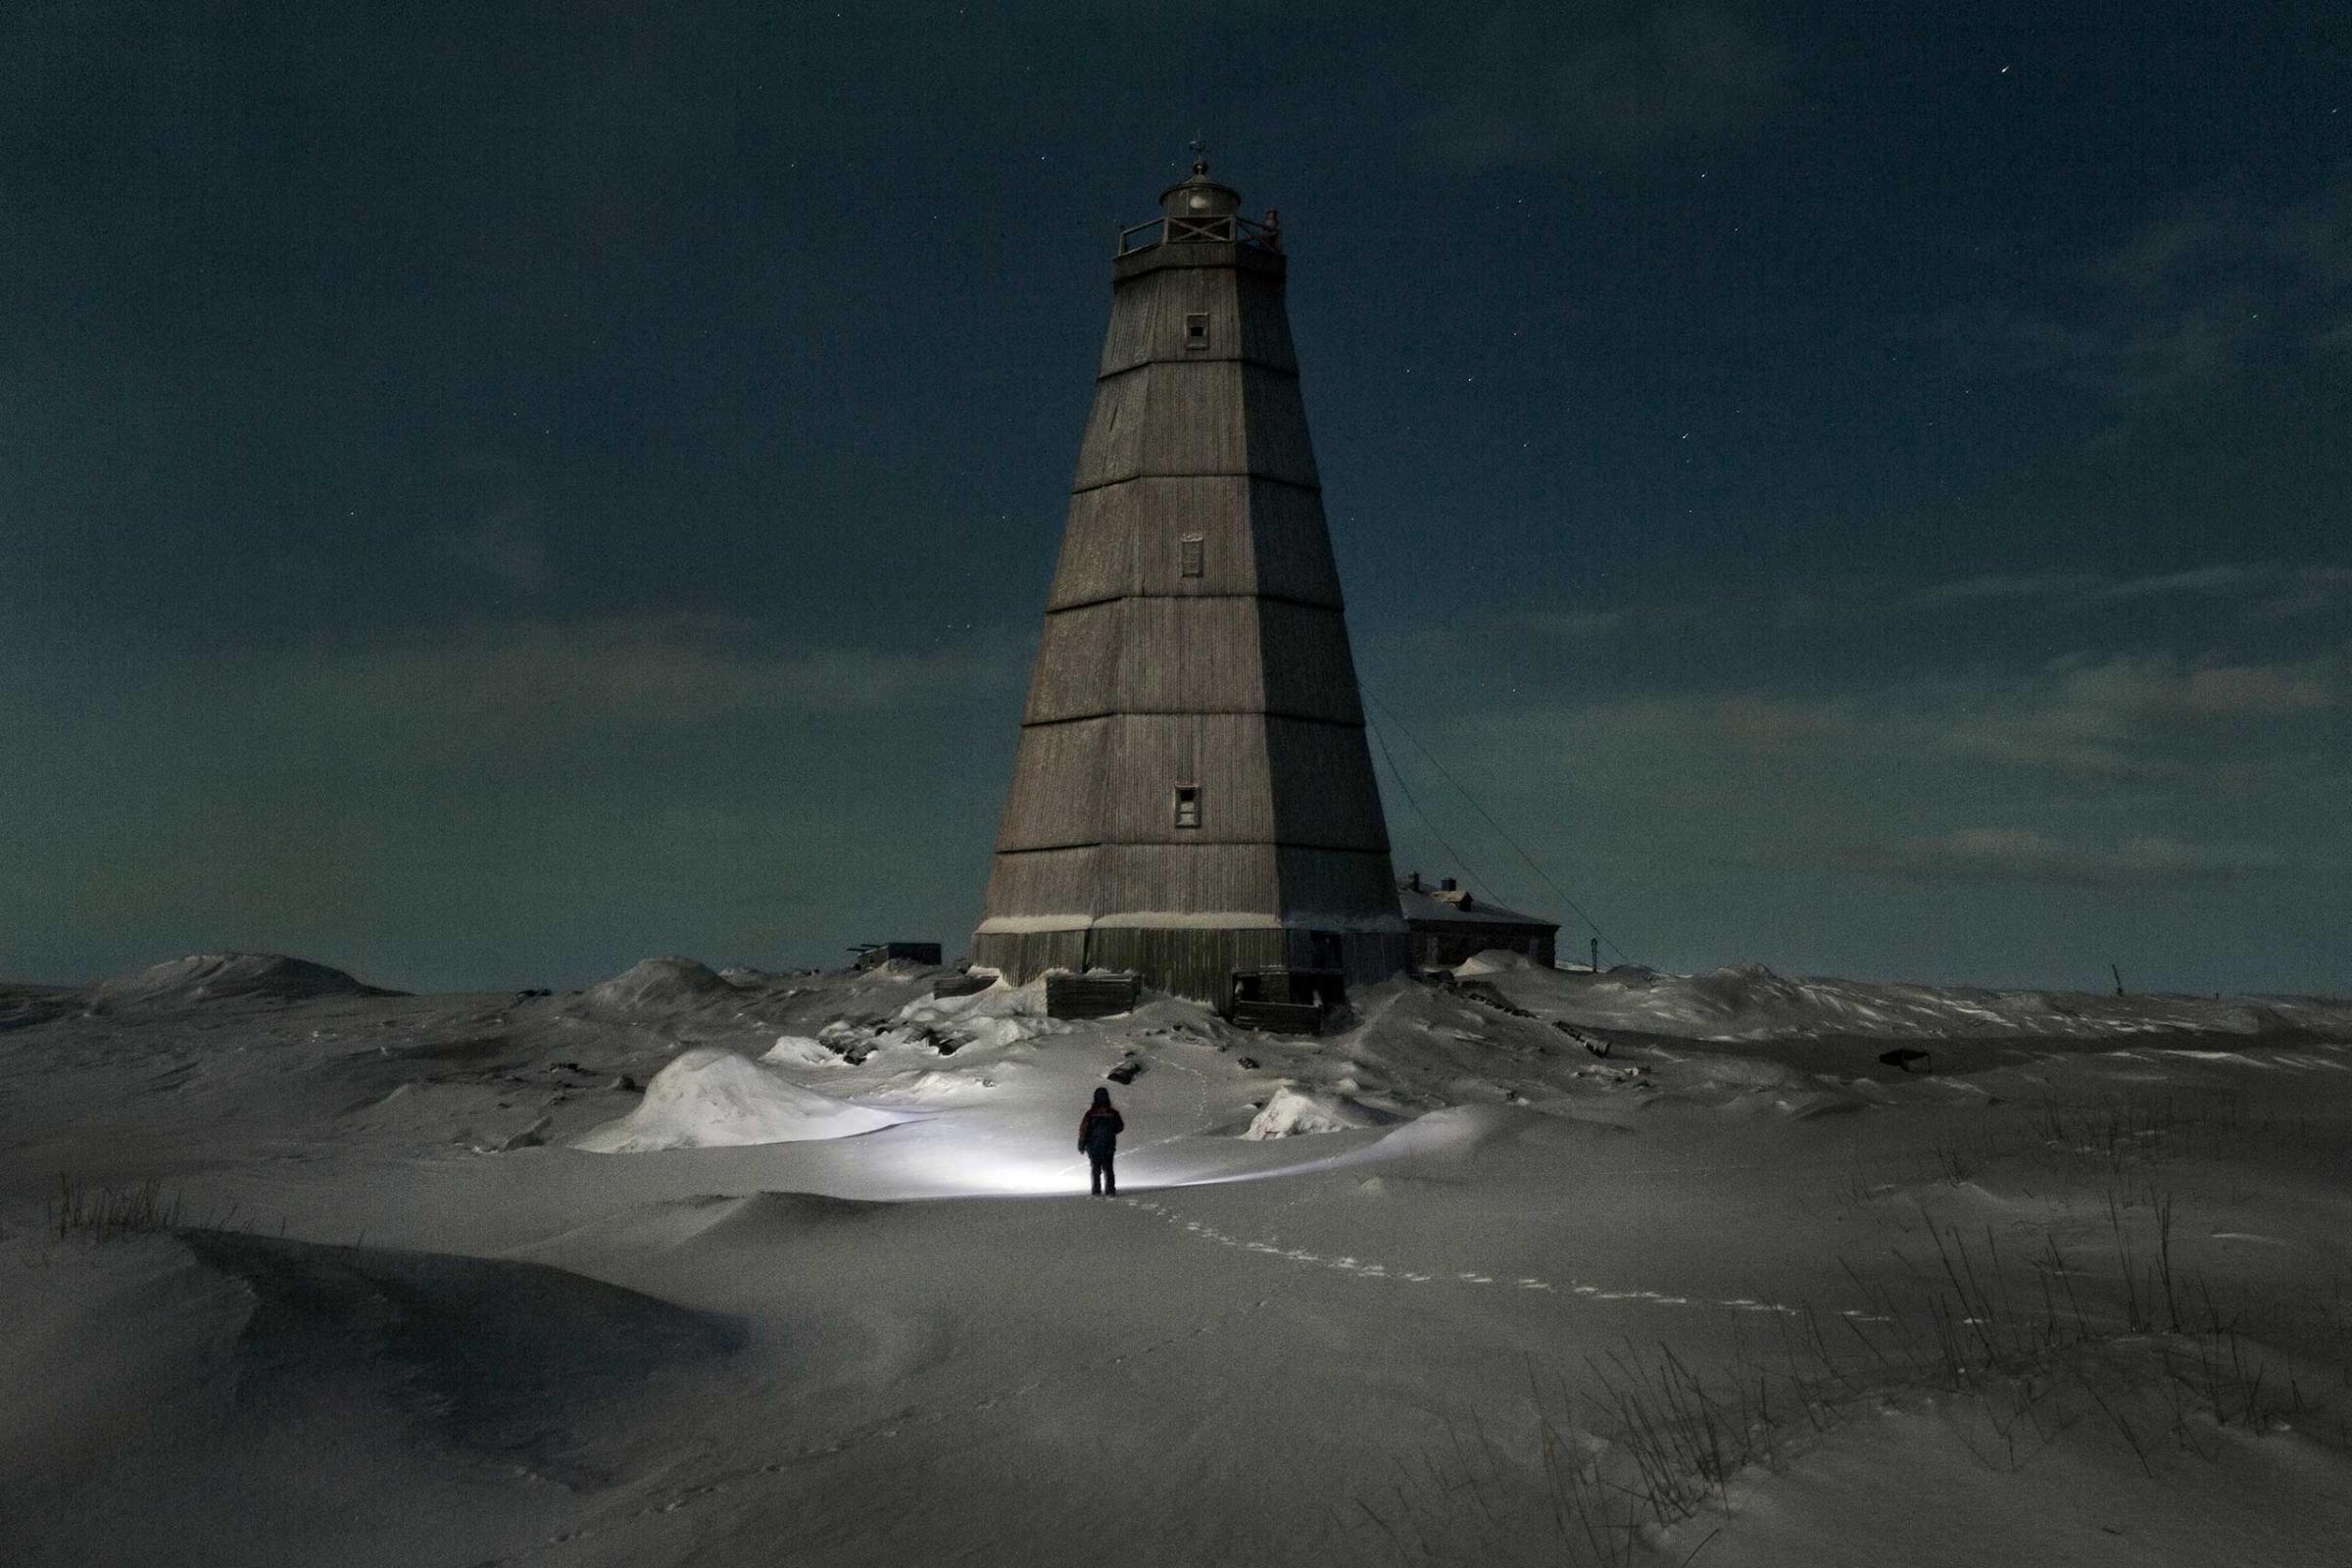 Slava walks to the old lighthouse near Hodovarikha meteorological station to take (dismantle) some fire wood from it’s walls. Full moon.